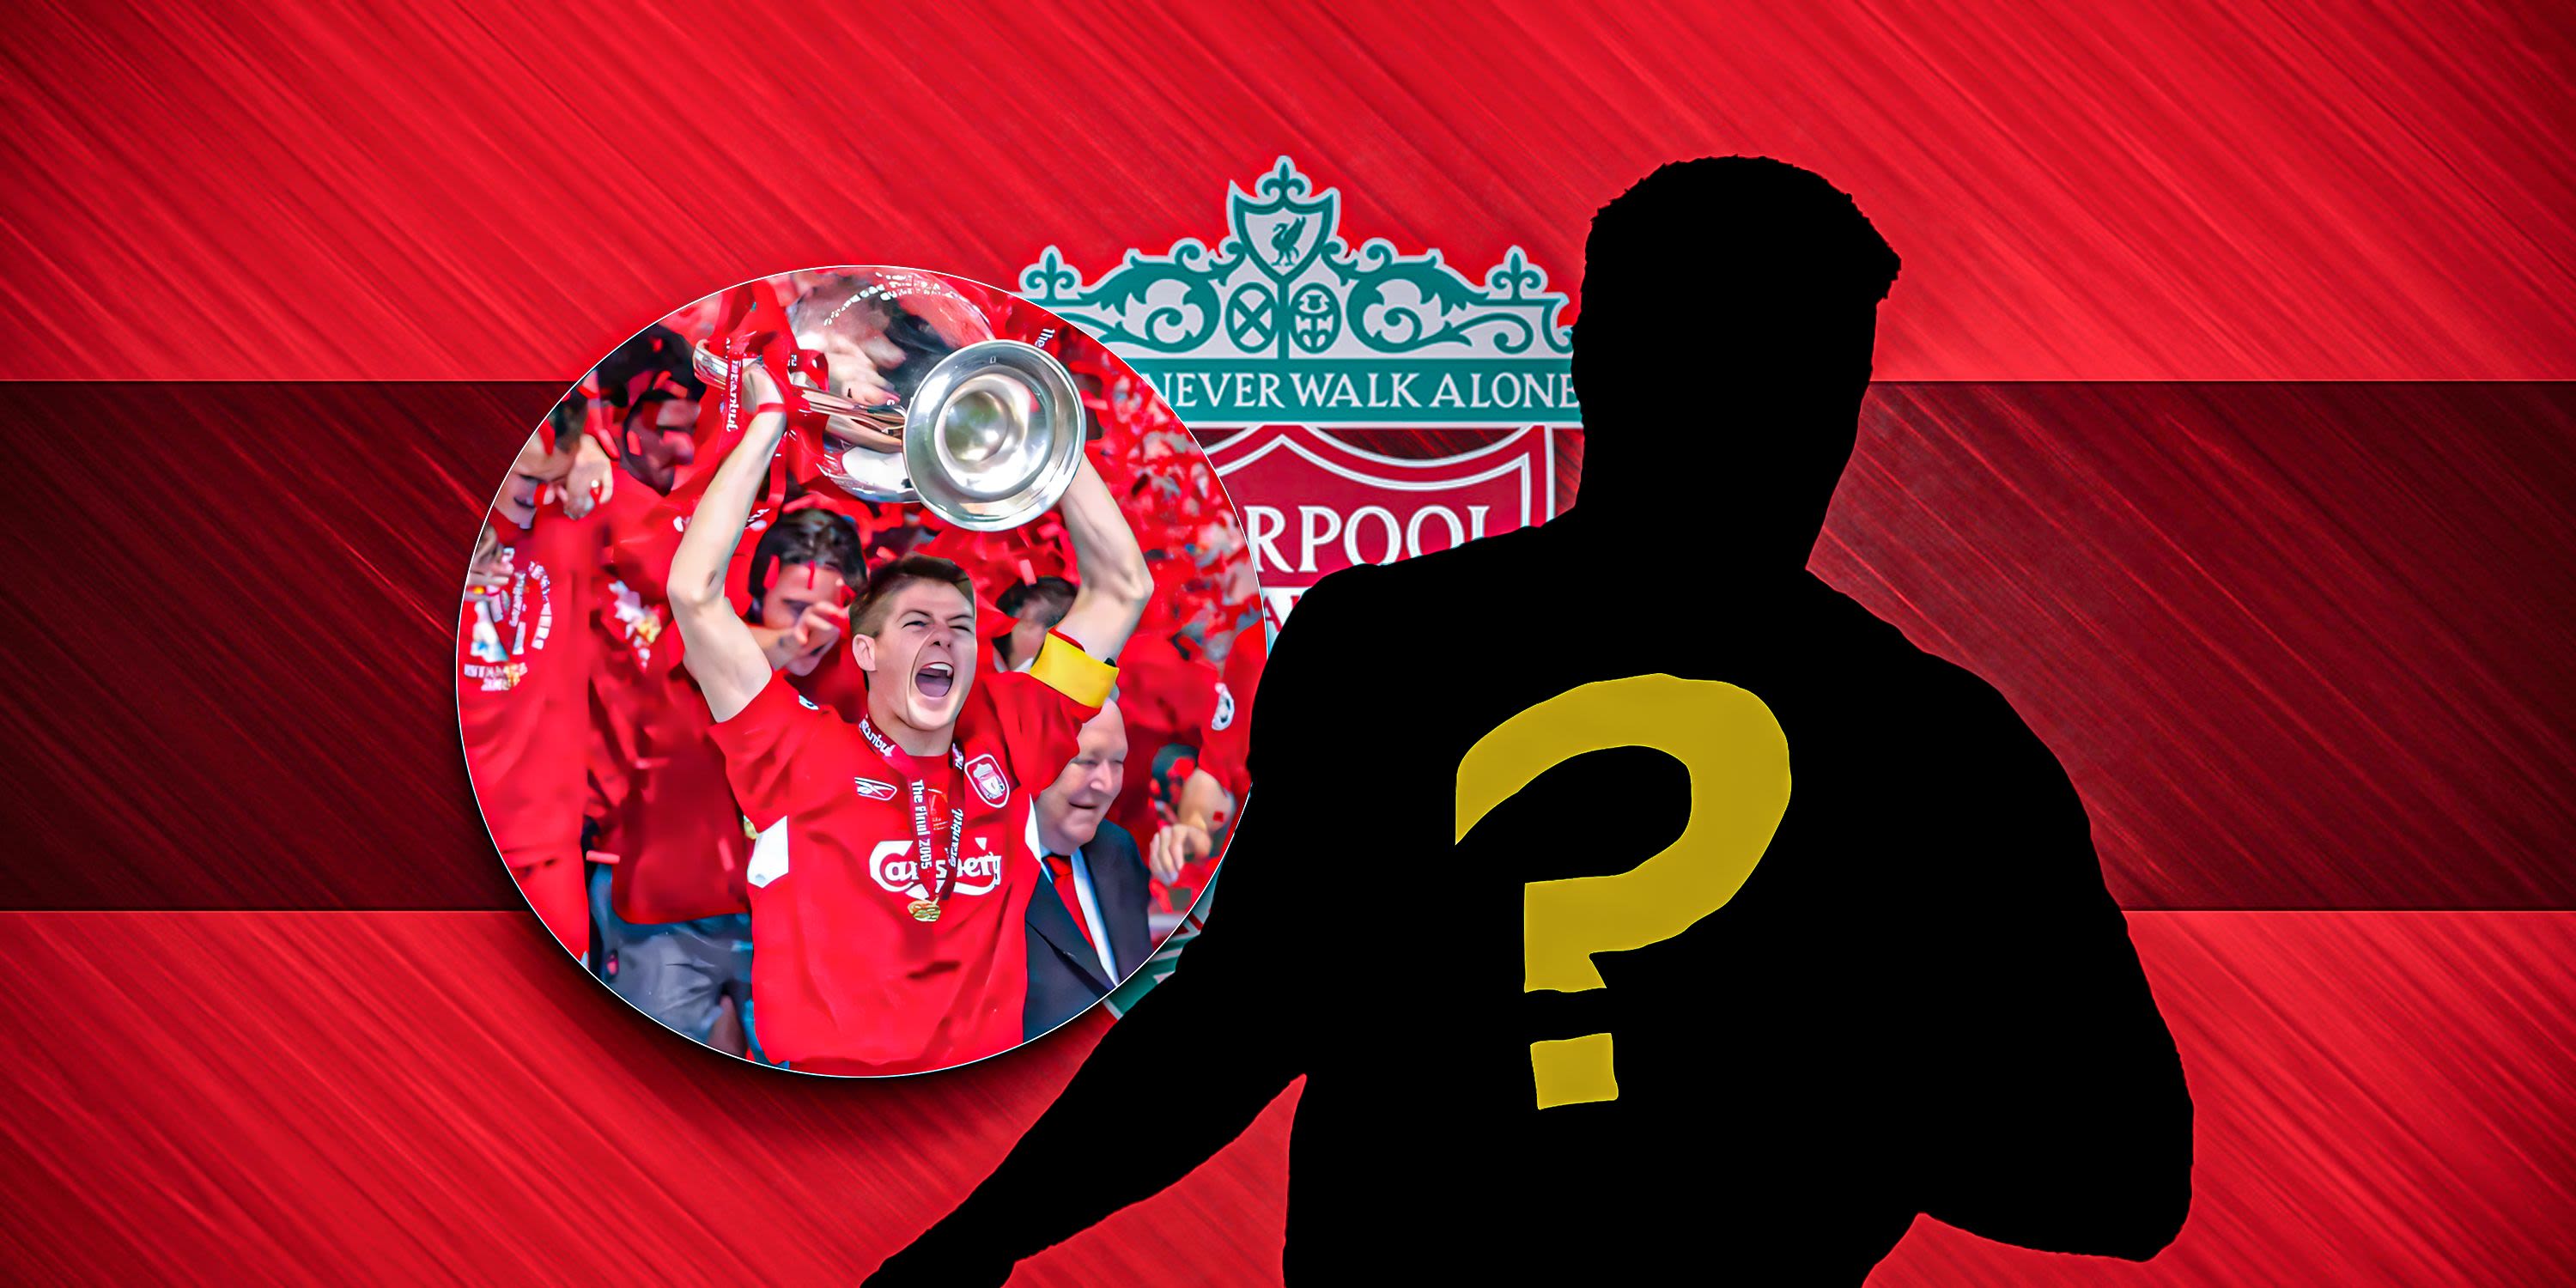 'I won the Champions League with Liverpool - this is why I'm not in the photos'